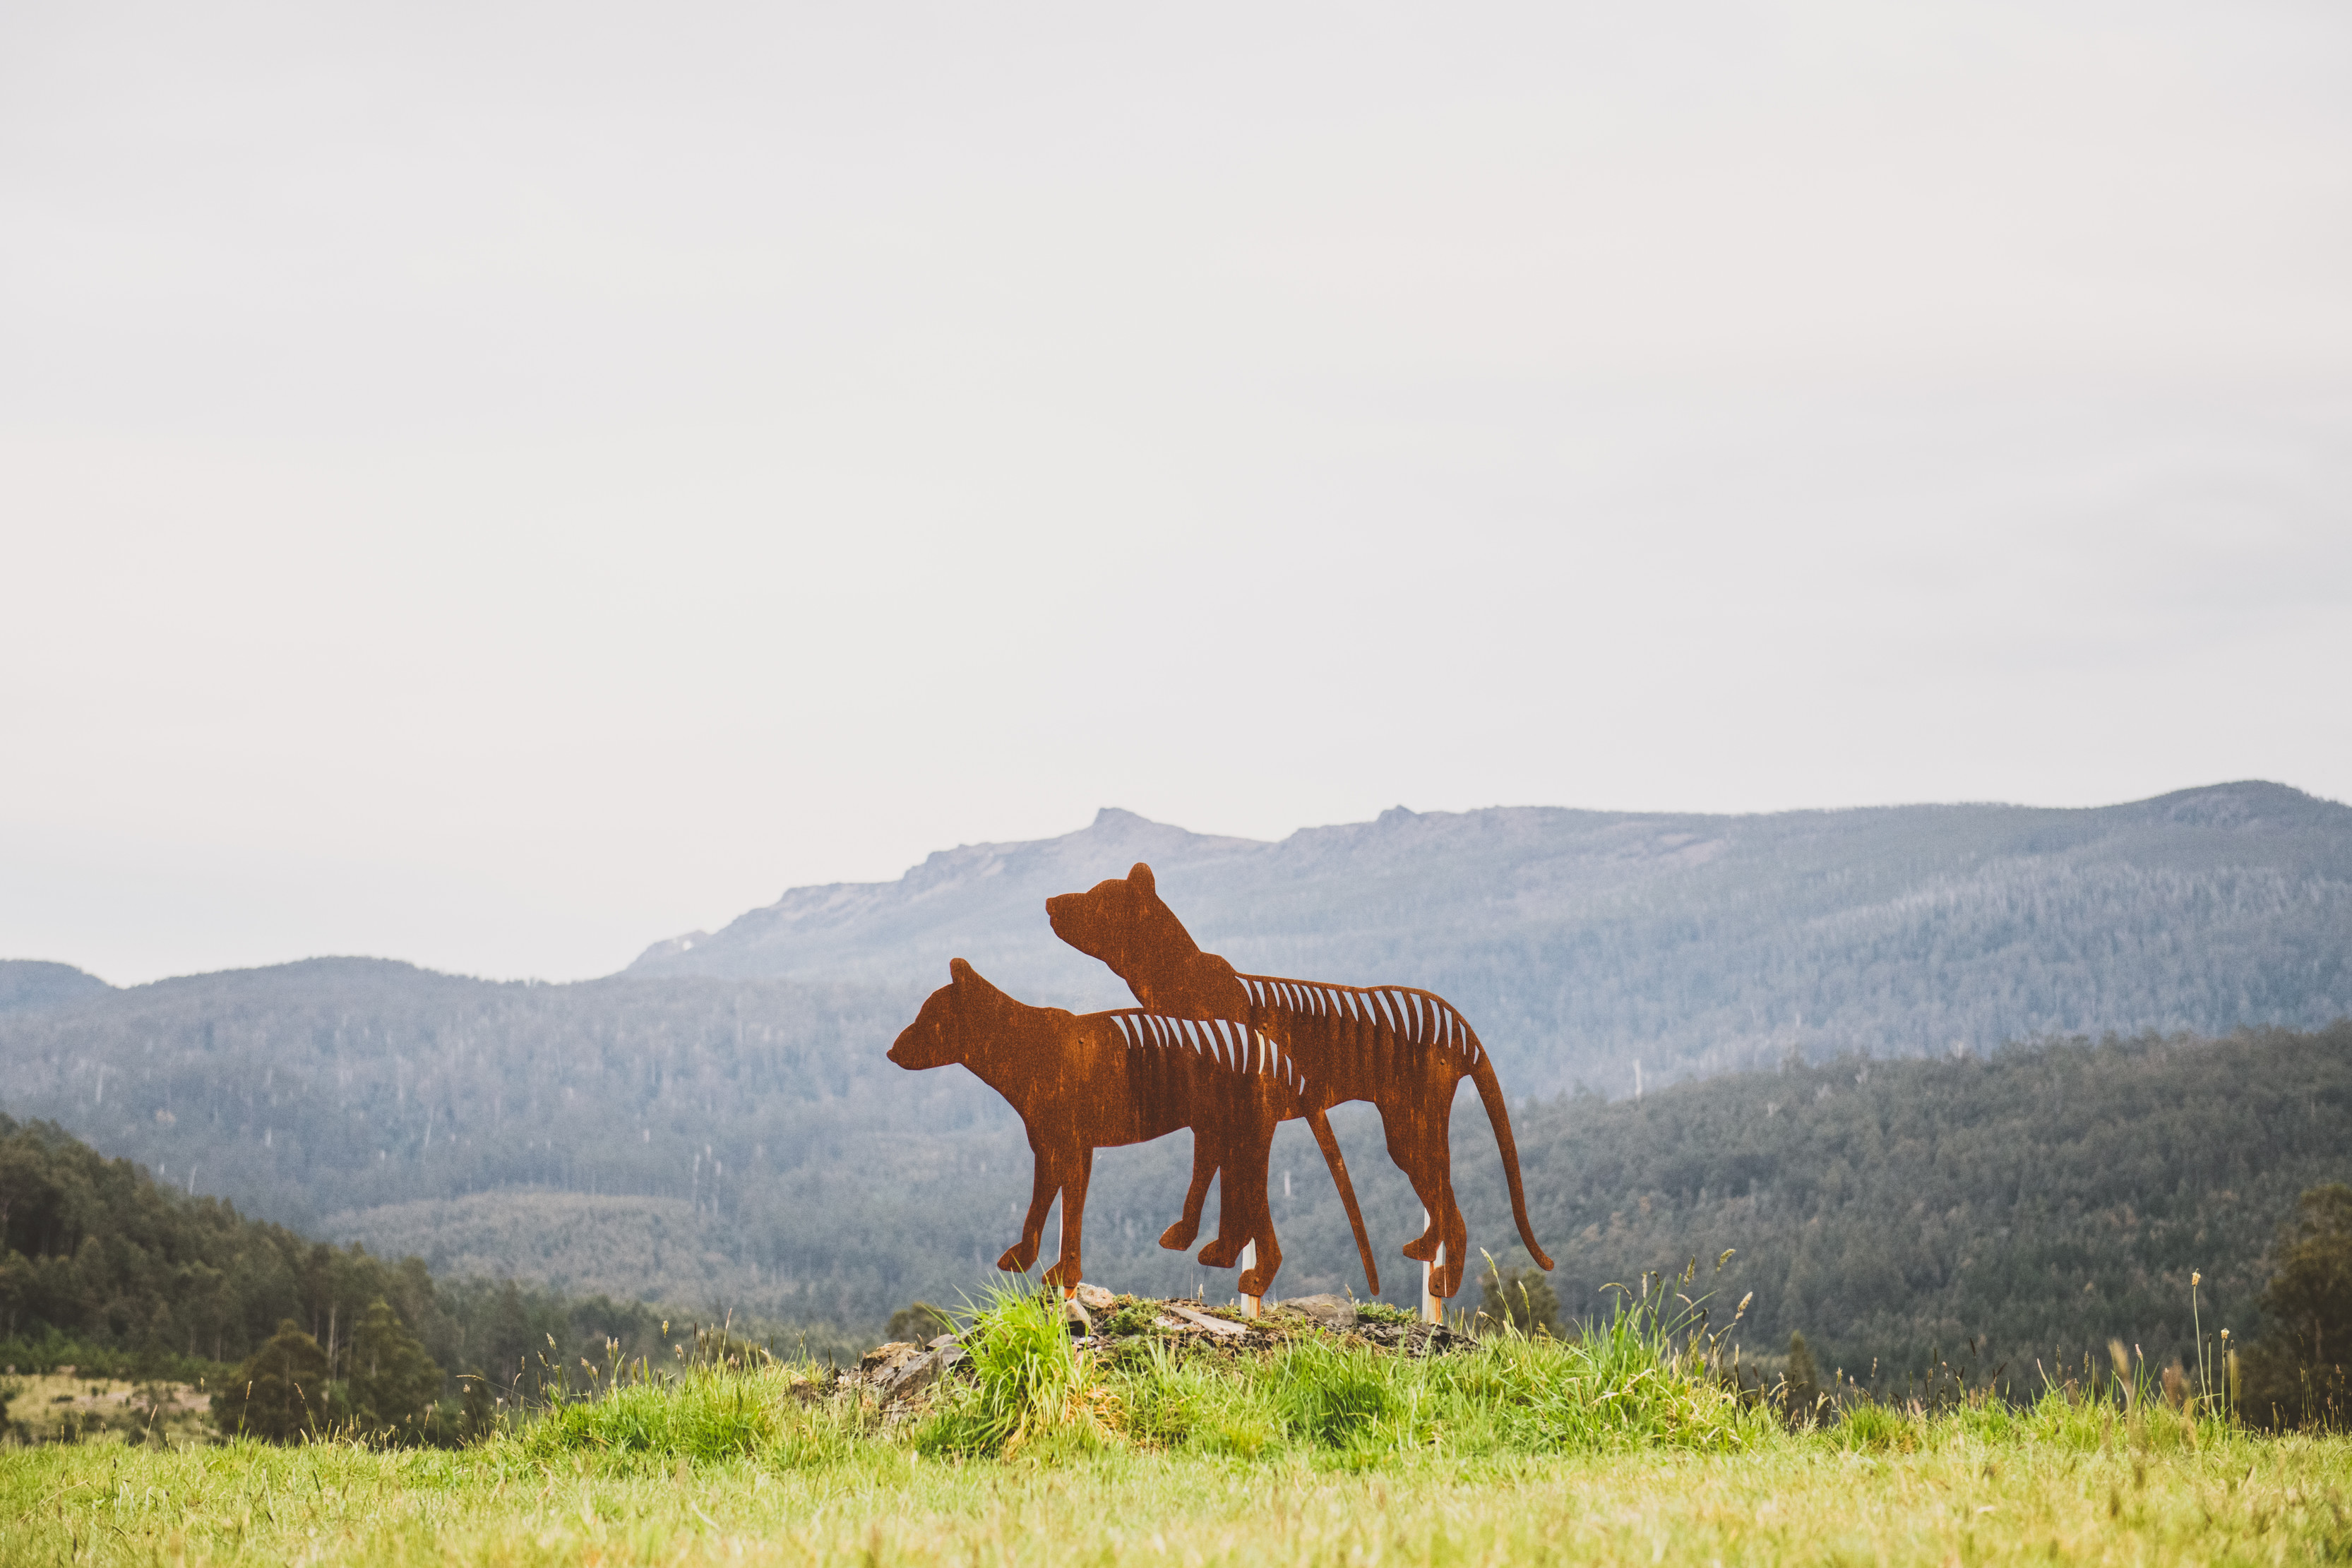 Rusted metal Tasmanian tiger sculpture with mountains in the background.